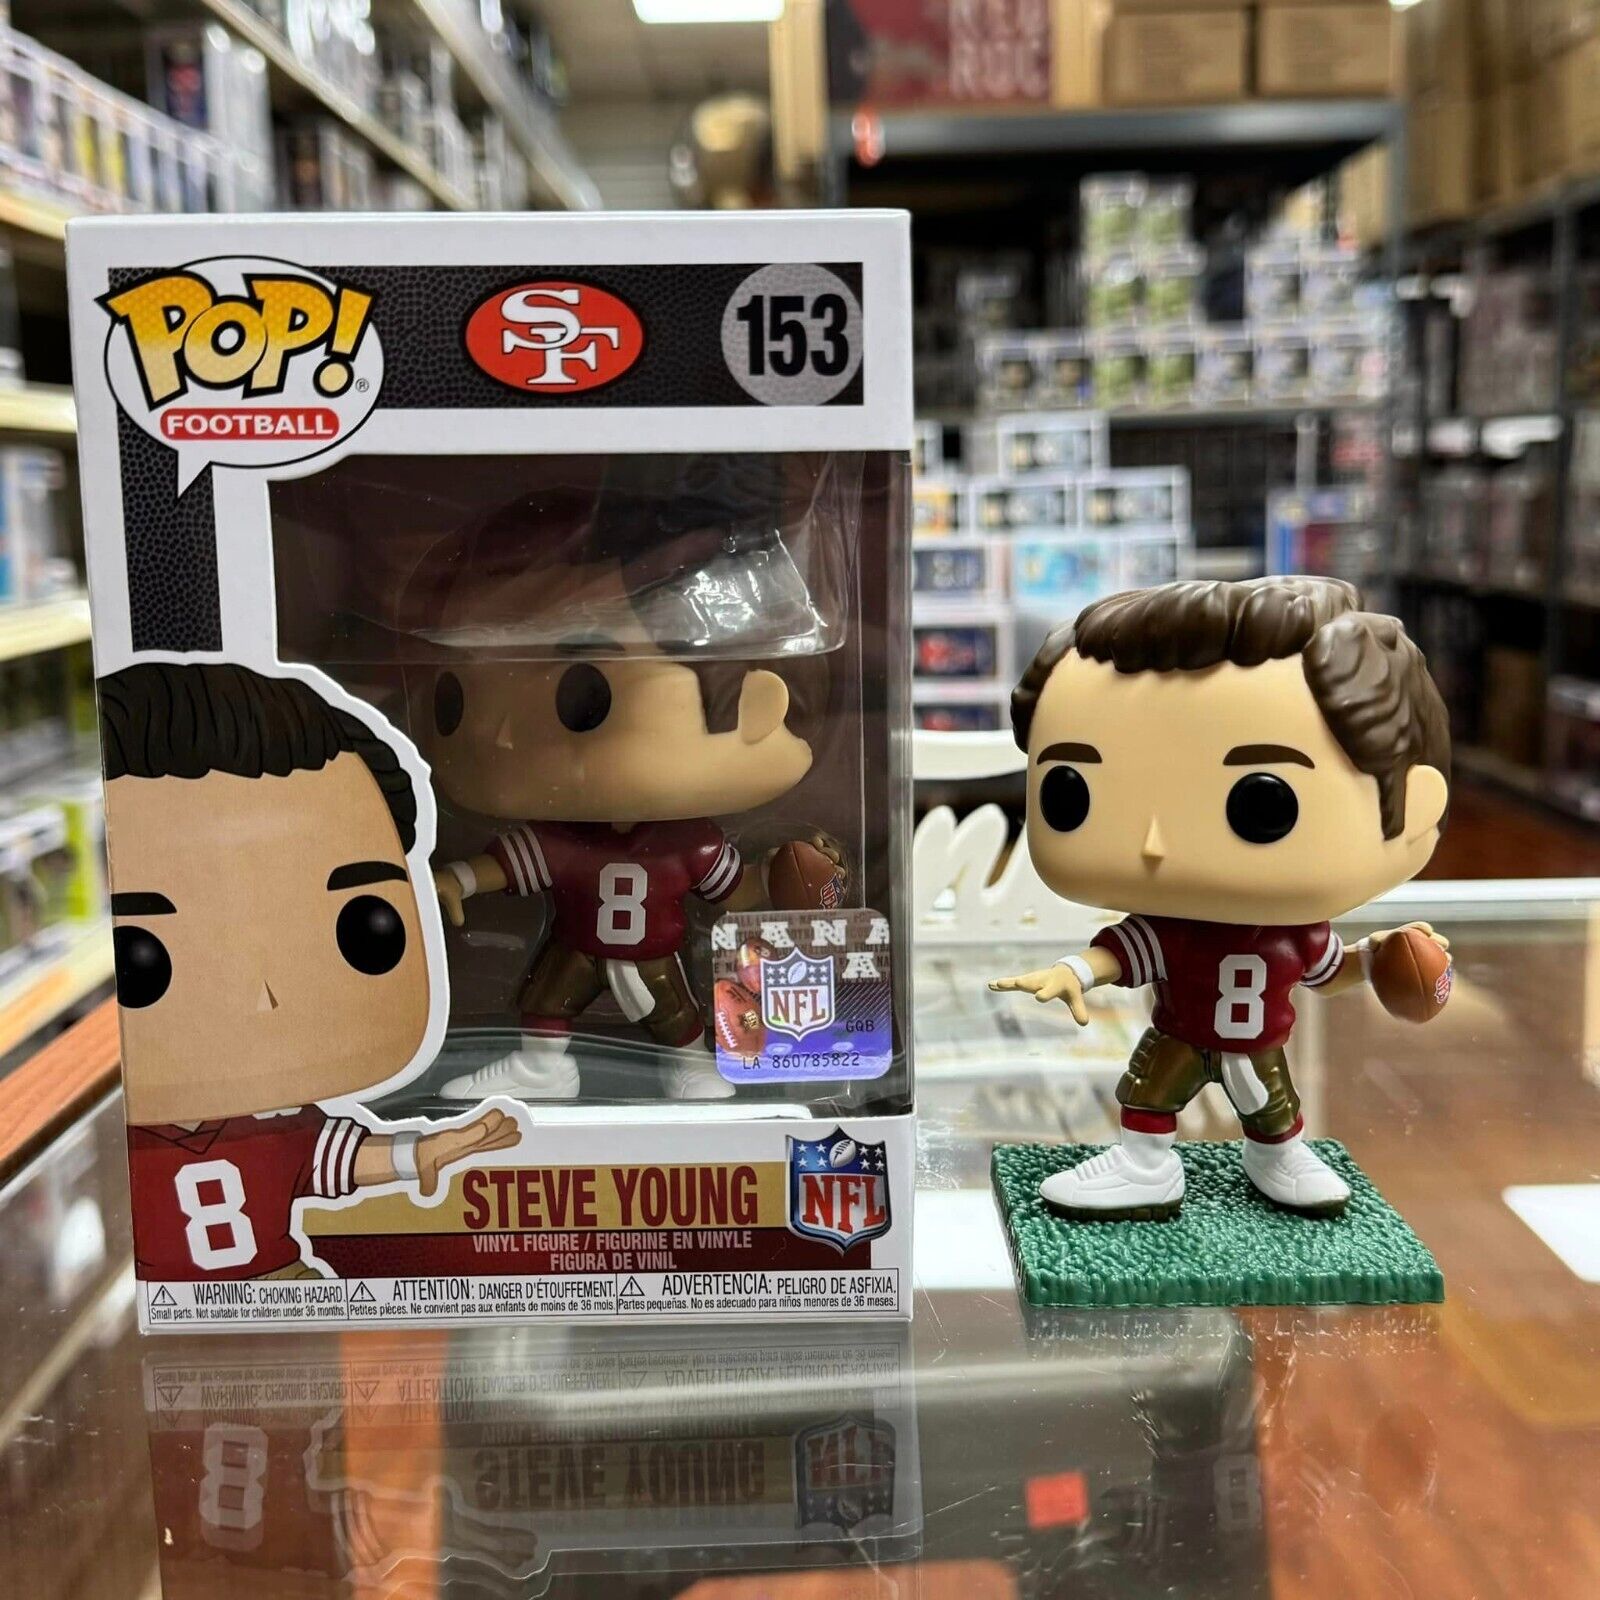 Funko POP FOOTBALL 49ERS STEVE YOUNG NFL Vinyl Figure with protector